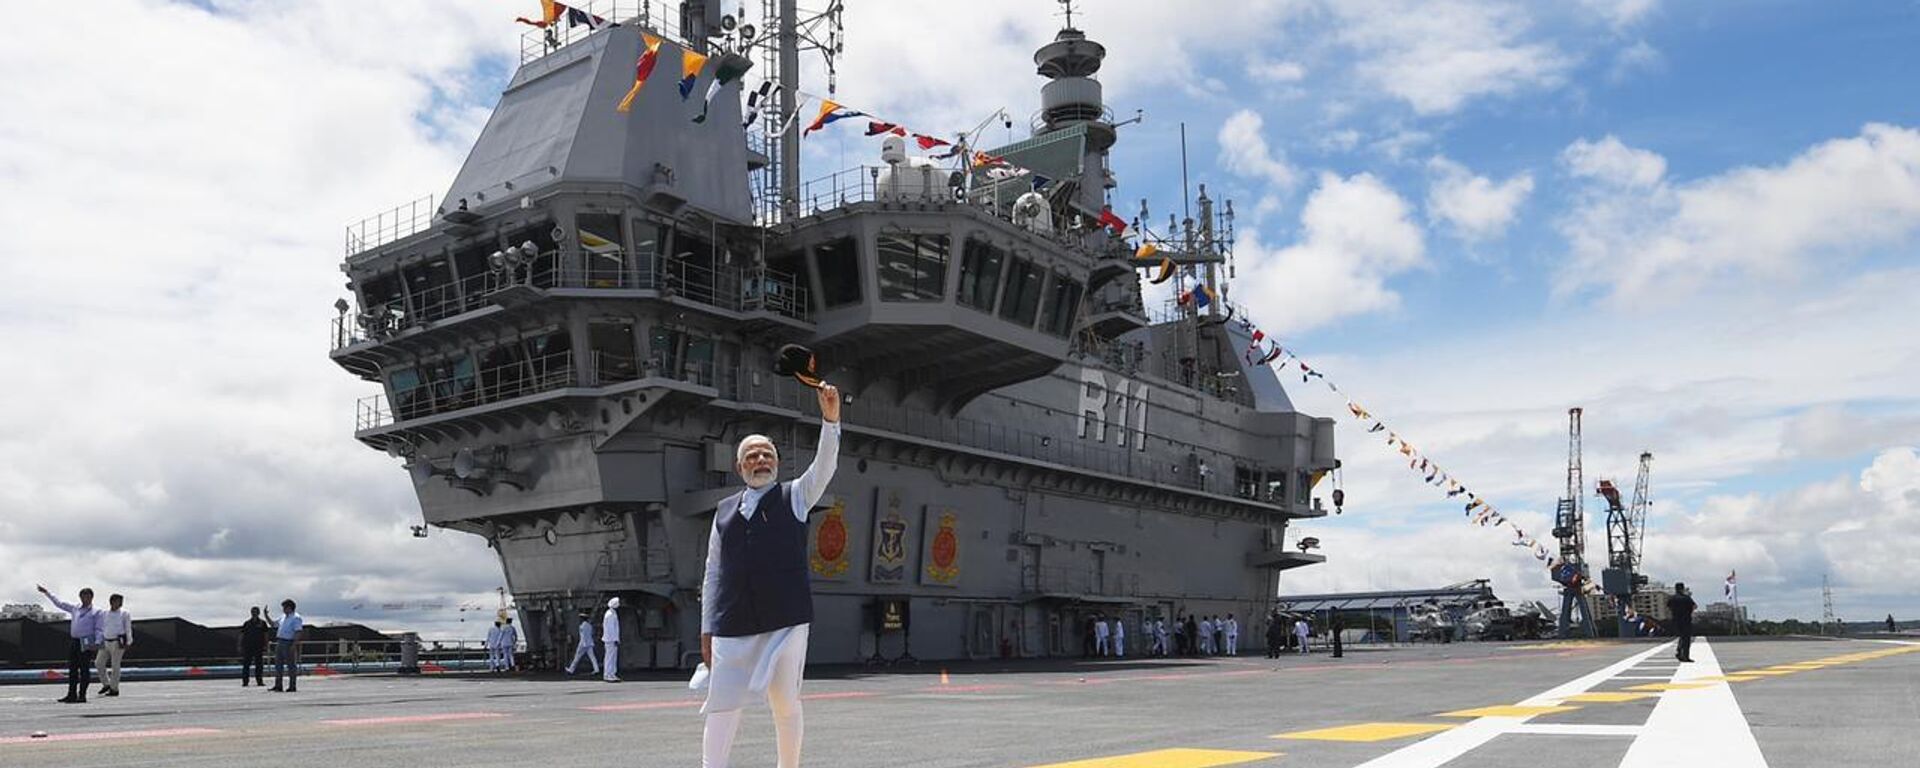 Glimpses from the special programme to mark the commissioning of INS Vikrant - Sputnik India, 1920, 31.03.2023